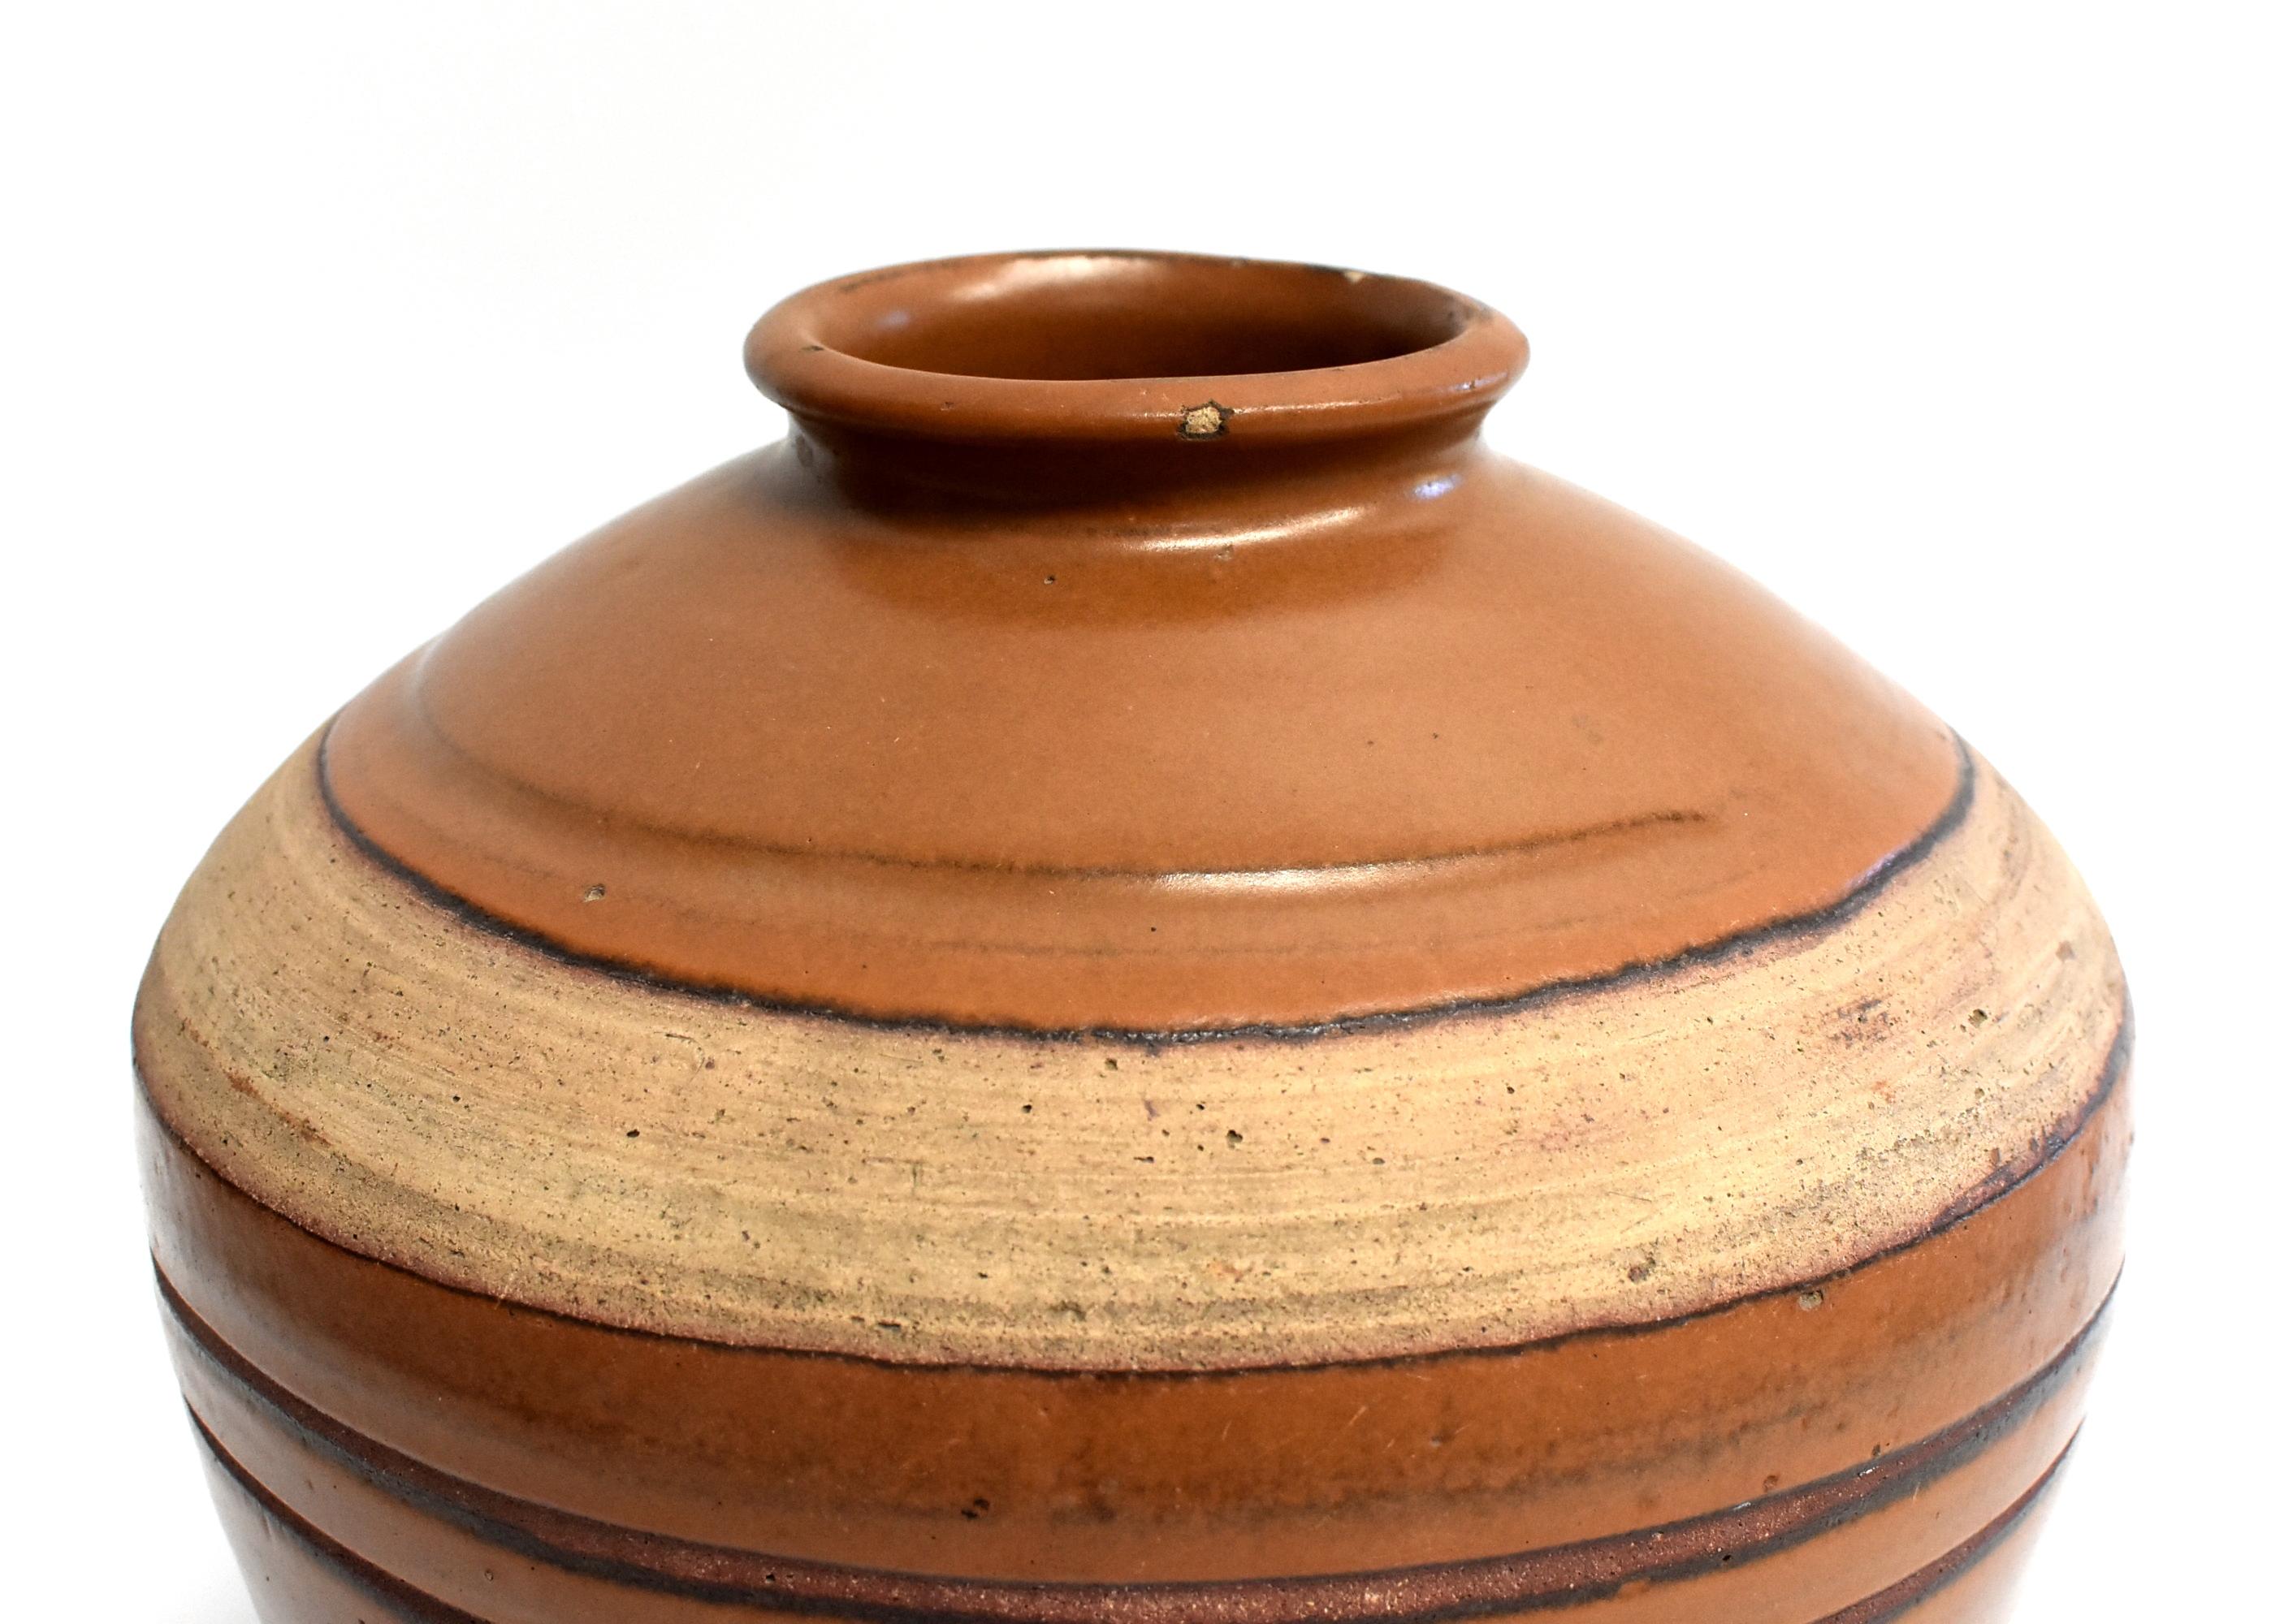 Large Antique Brown Jar with Black Rings, Handmade Chinese Pottery 4